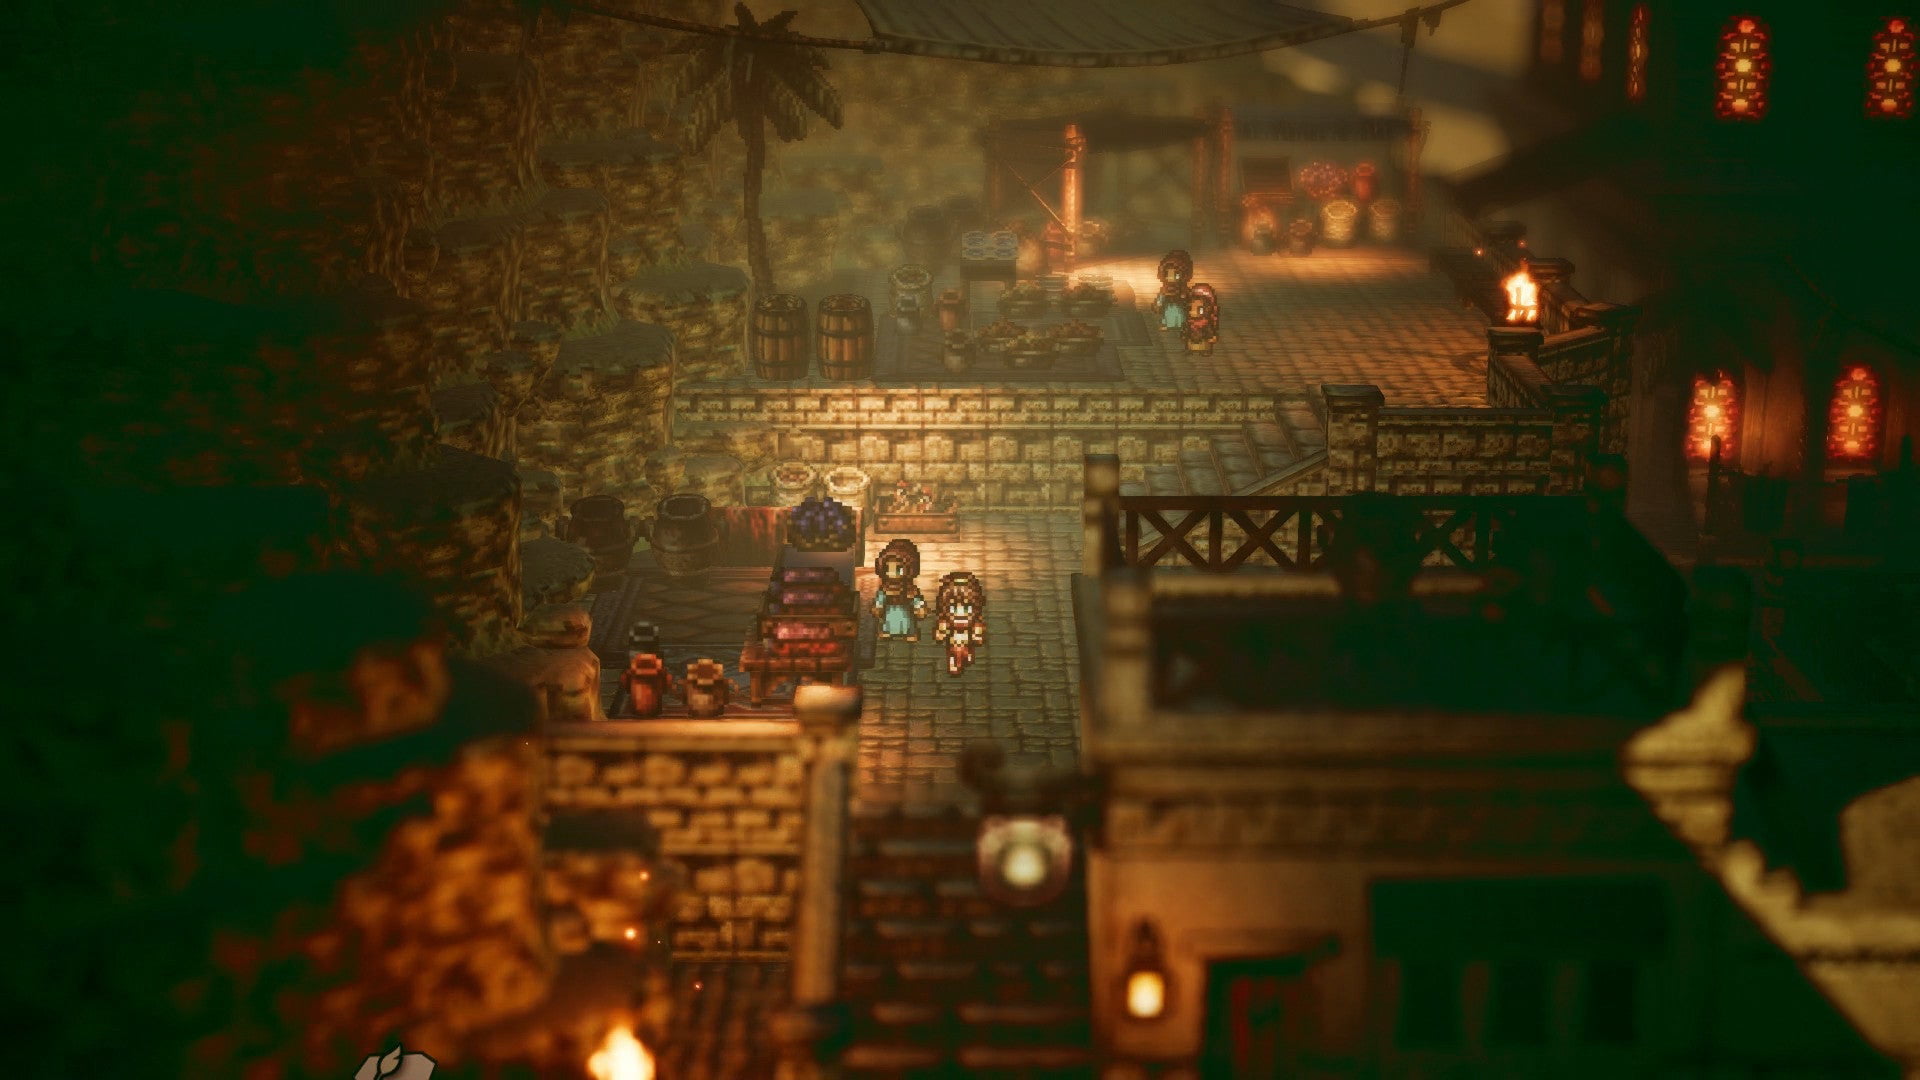 OCTOPATH TRAVELER (SWITCH) cheap - Price of $16.55